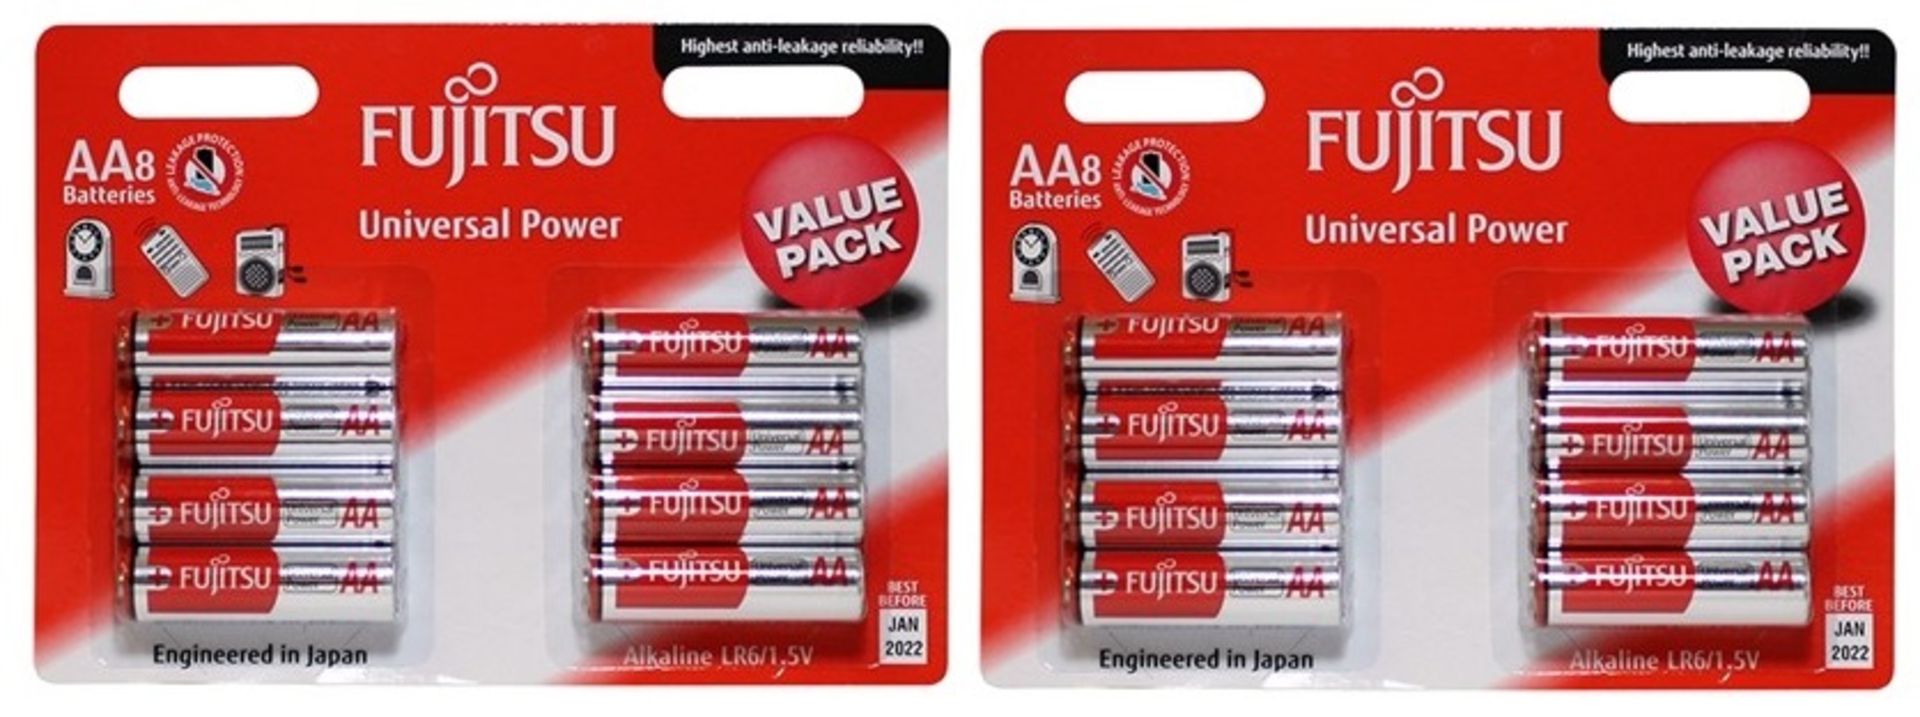 V *TRADE QTY* Brand New Two Packs of Eight Fujitsu AA Universal Power Batteries (16 Batteries in